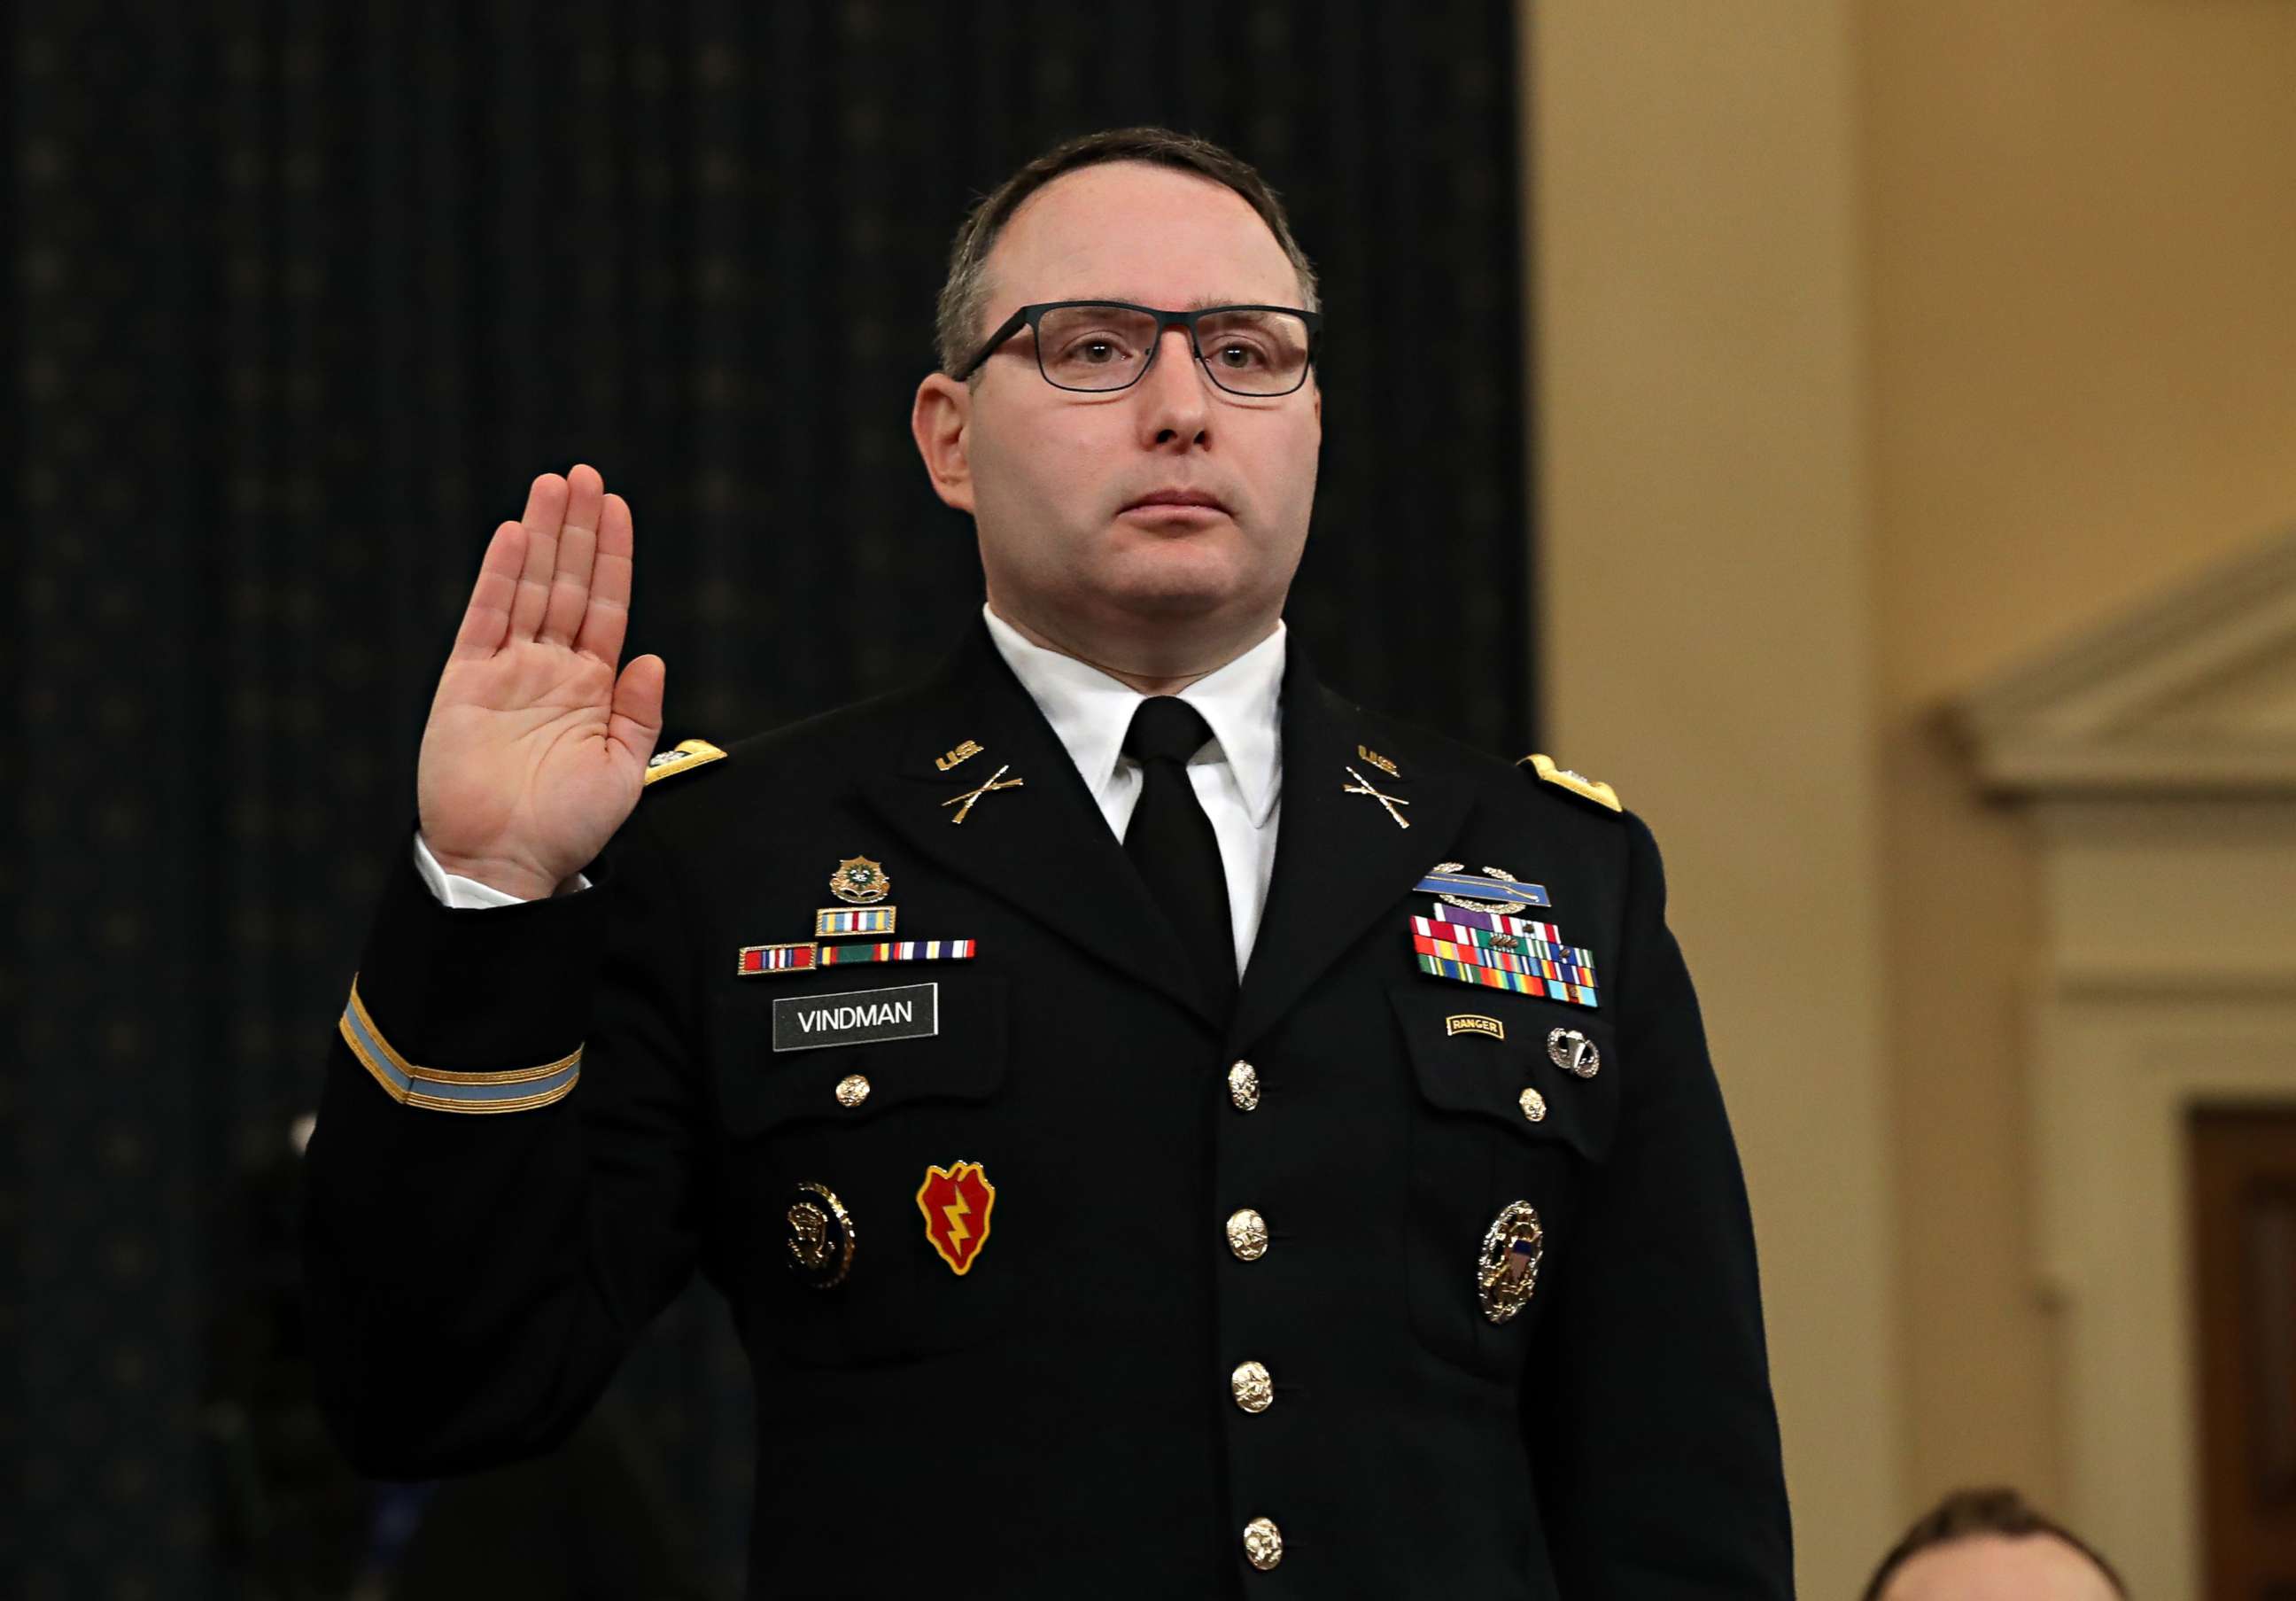 PHOTO: Key Impeachment witness Lt. Col. Alexander Vindman has been removed from White House job on Feb. 7, 2020, but remains active duty in the military. 